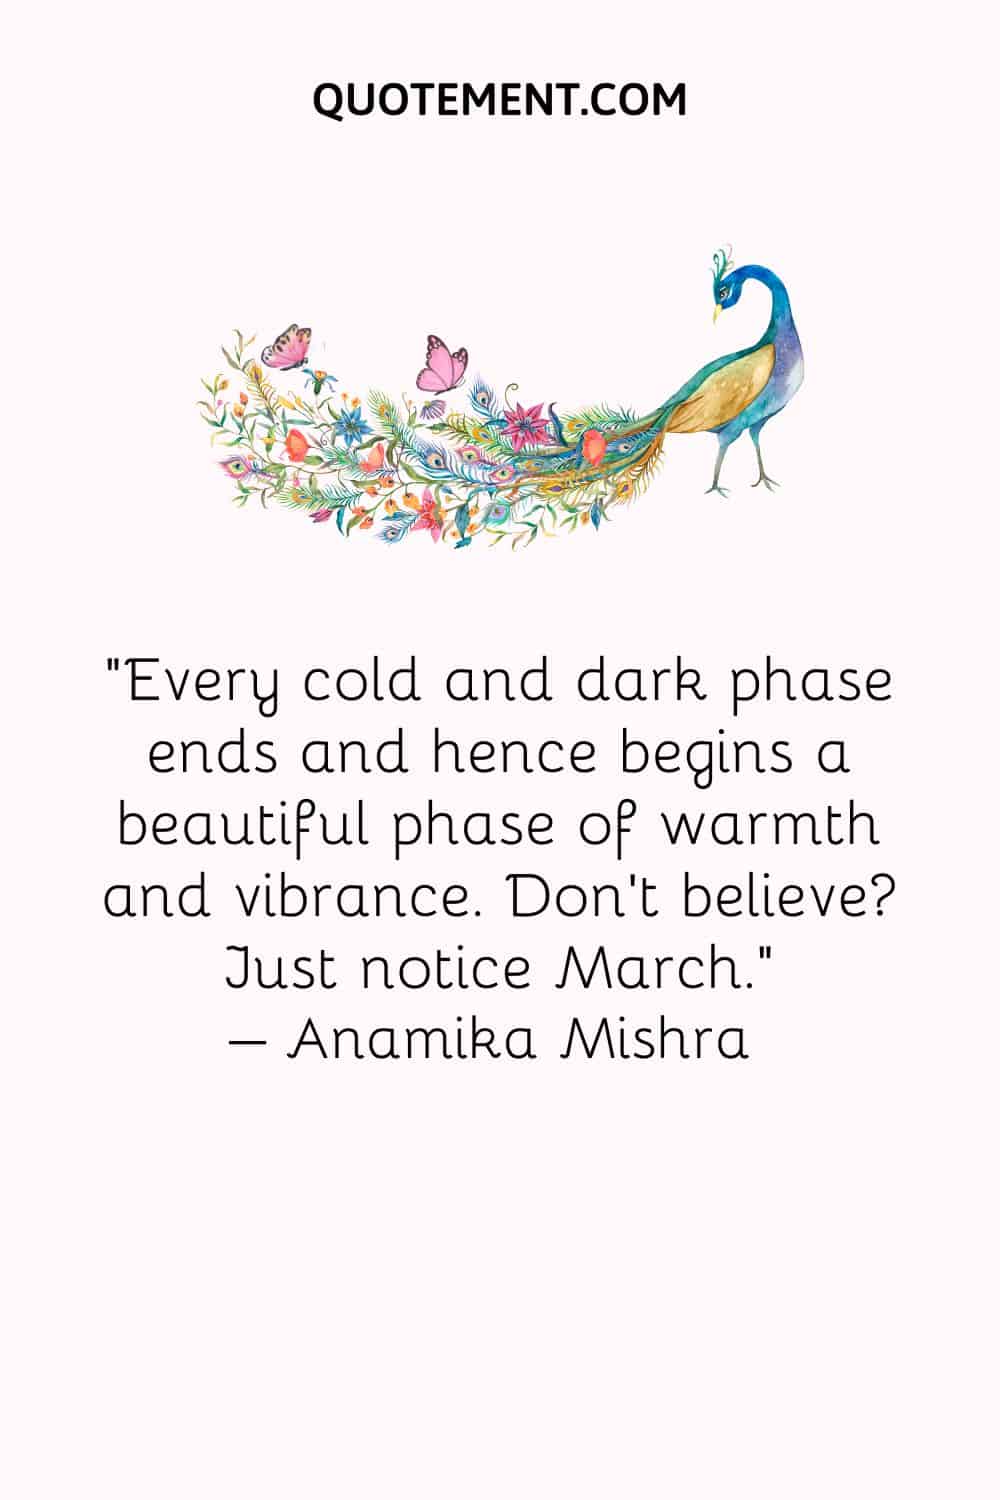 Every cold and dark phase ends and hence begins a beautiful phase of warmth and vibrance. Don’t believe Just notice March. – Anamika Mishra